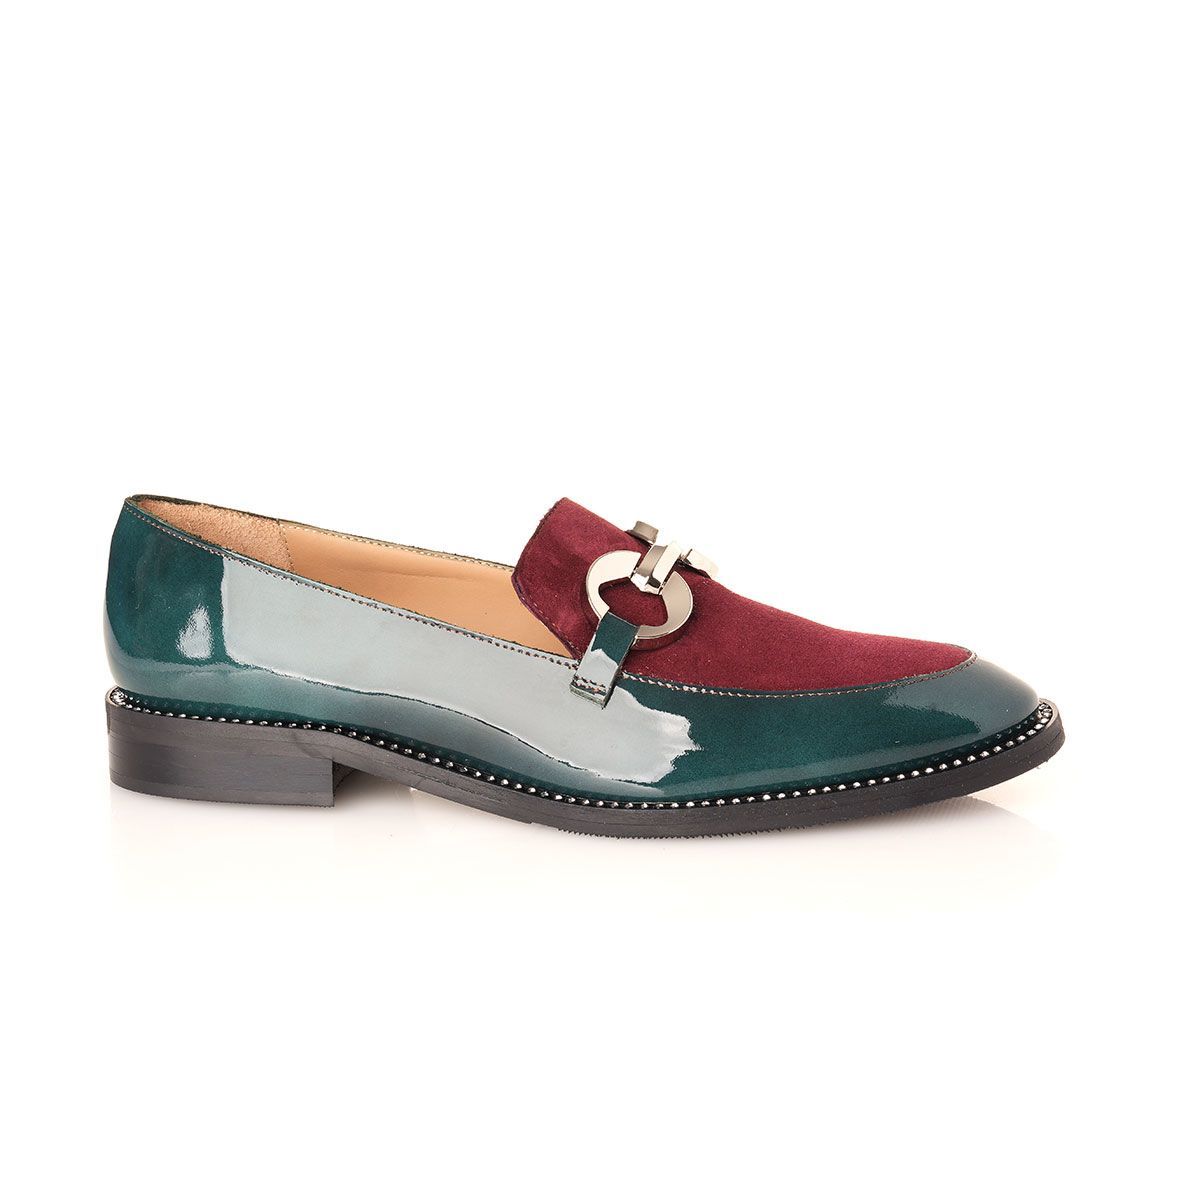 Green & Red Loafer